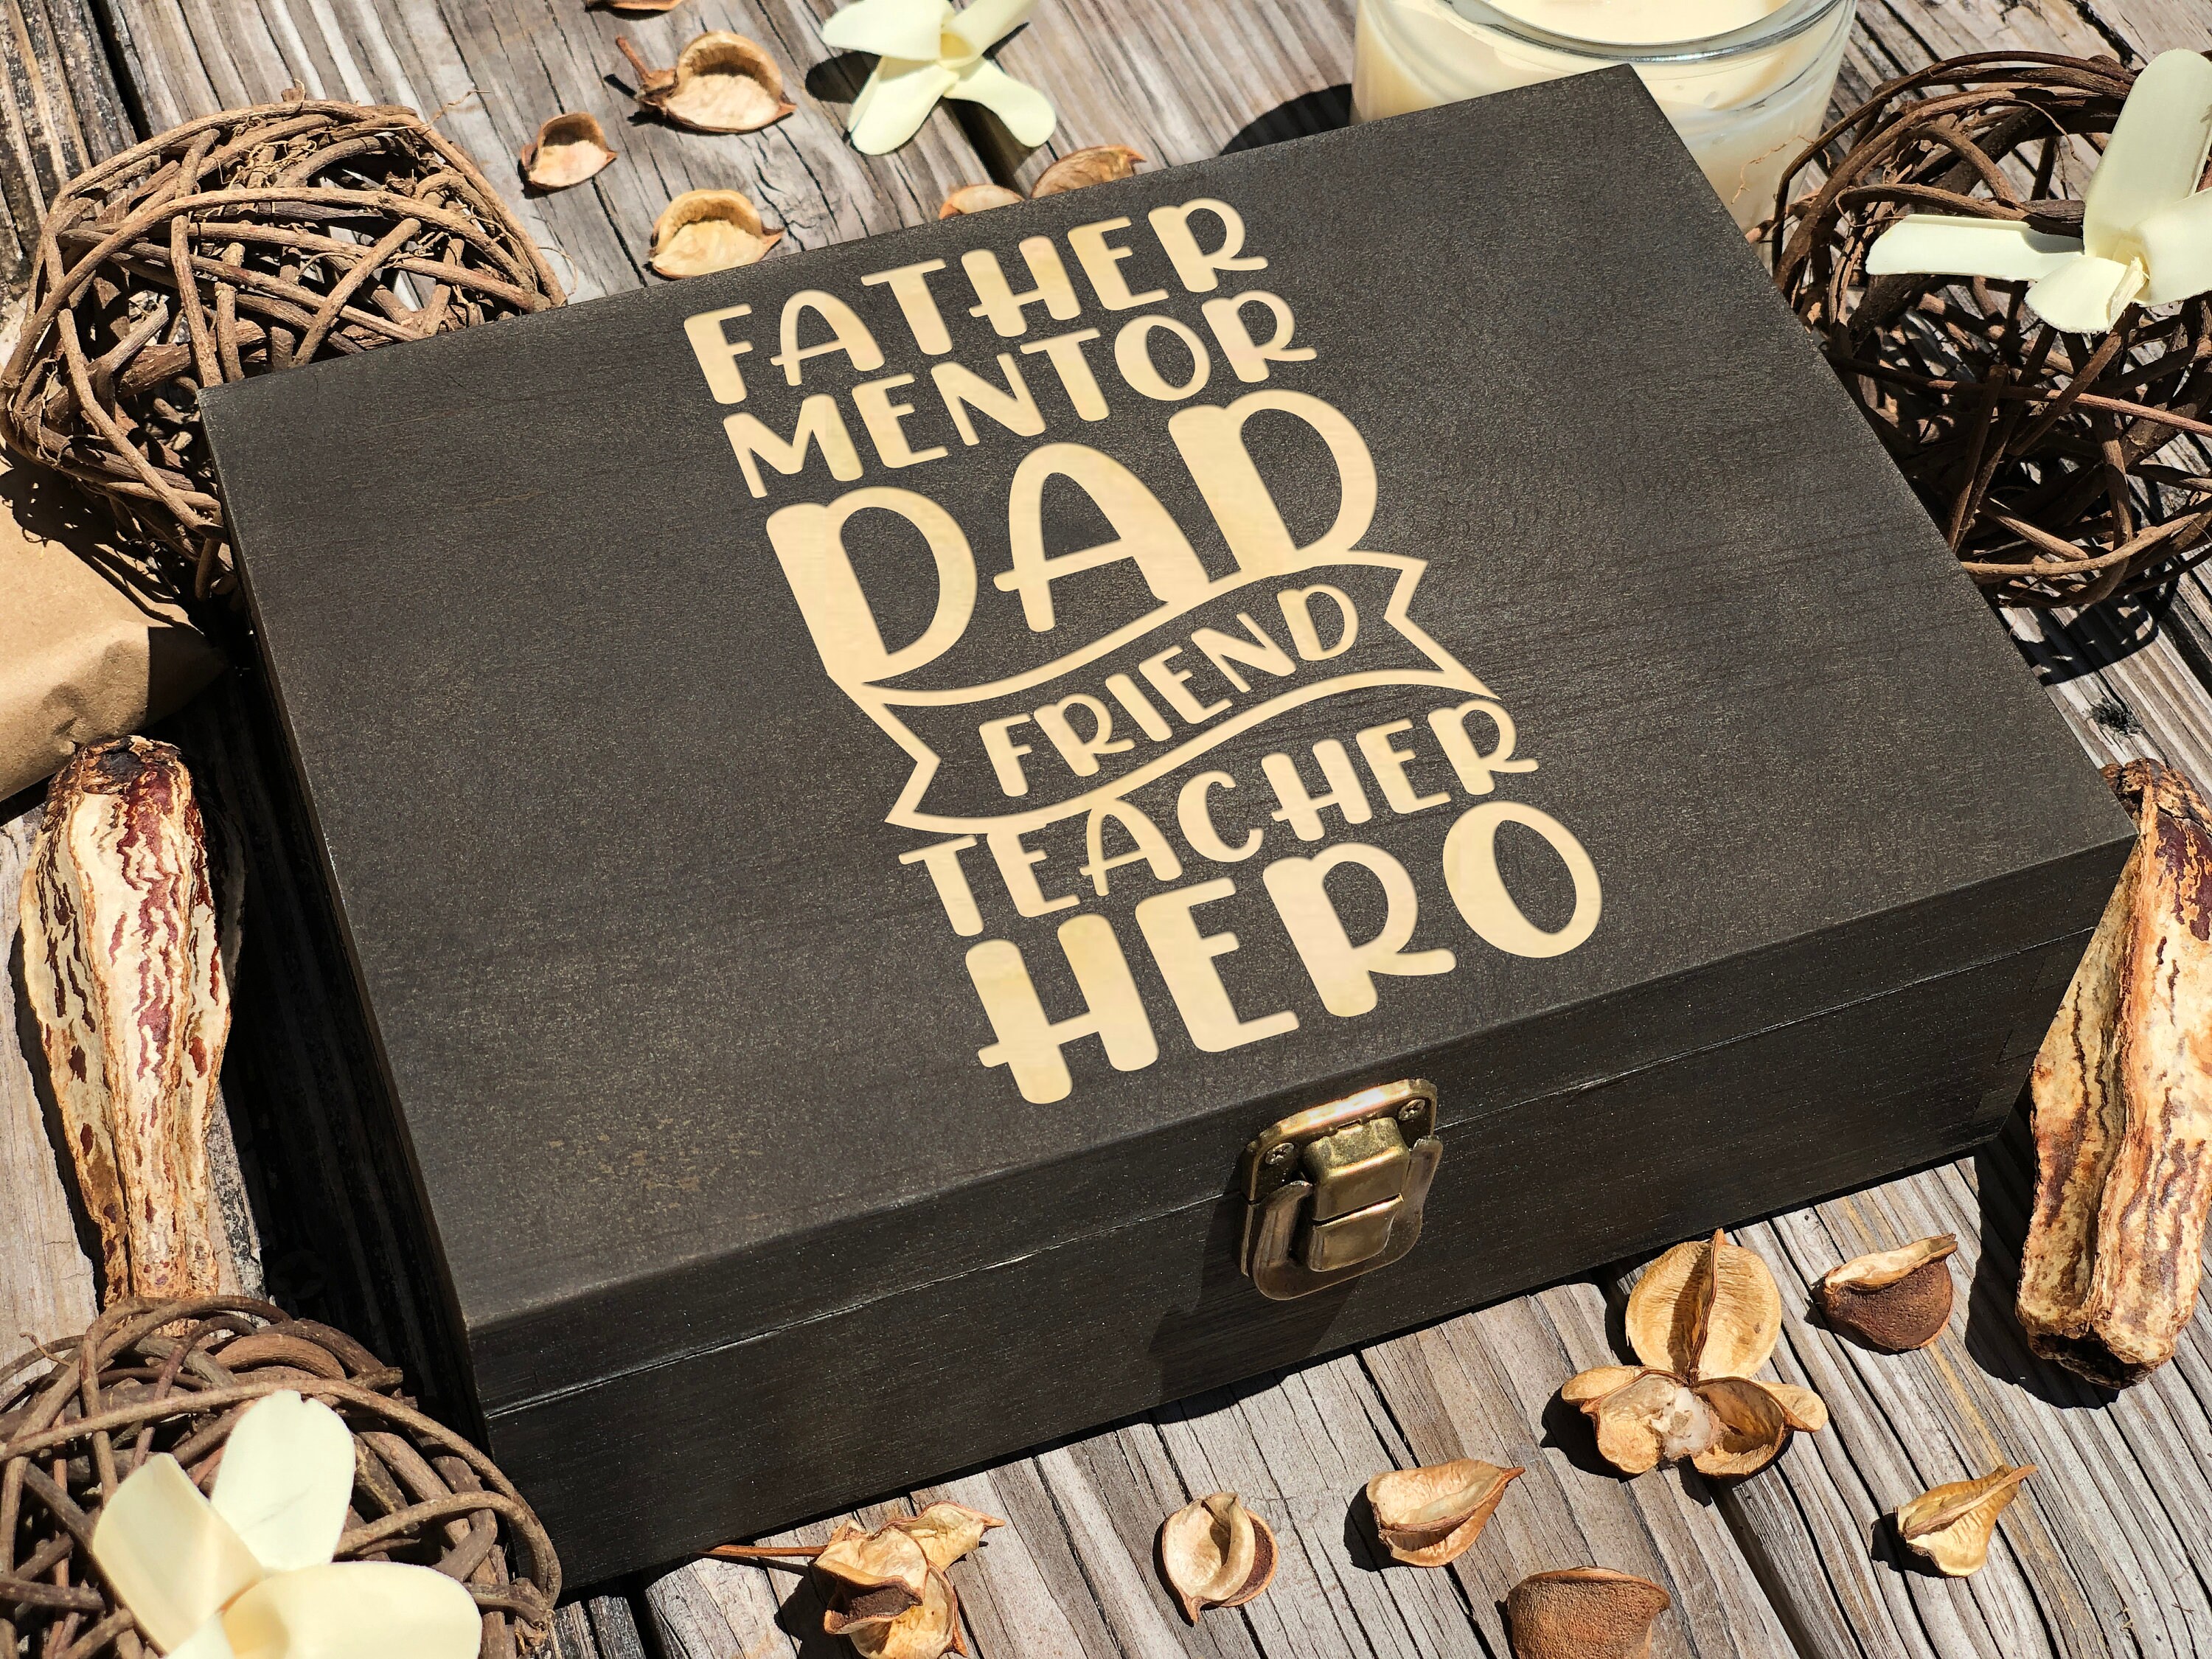 Personalized Hunting Ammo Box, Groomsmen Gifts, Fathers Day Gift, Gifts for  Him, Gifts for Men, Ammunition Box, Personalized Gifts for Dad 